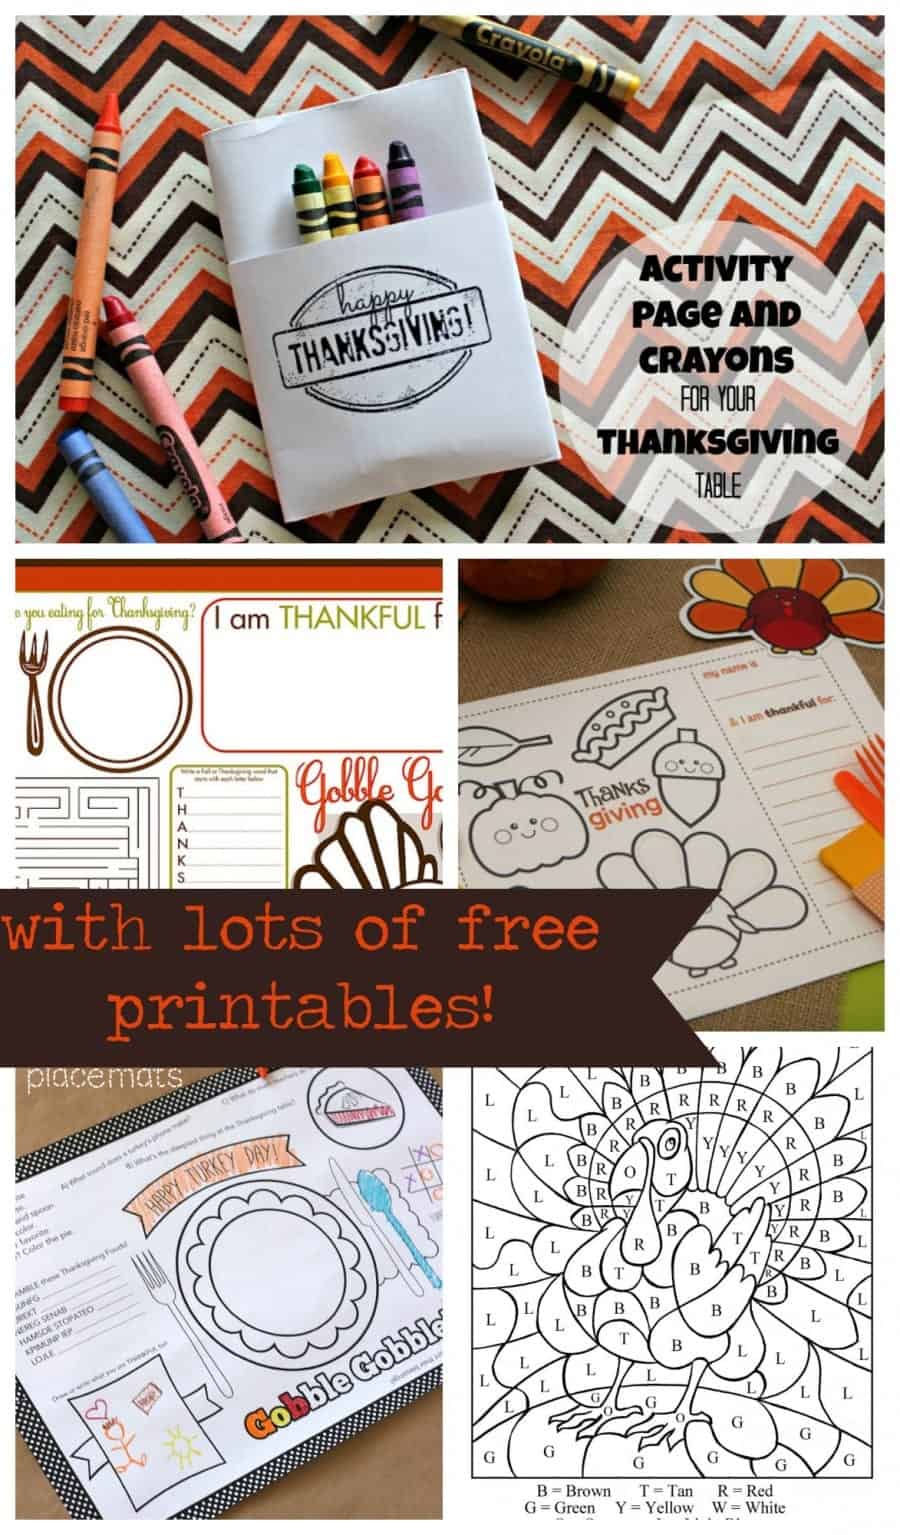 how to fold an activity page to hold crayons with links to lots of free printables perfect for Thanksgiving!